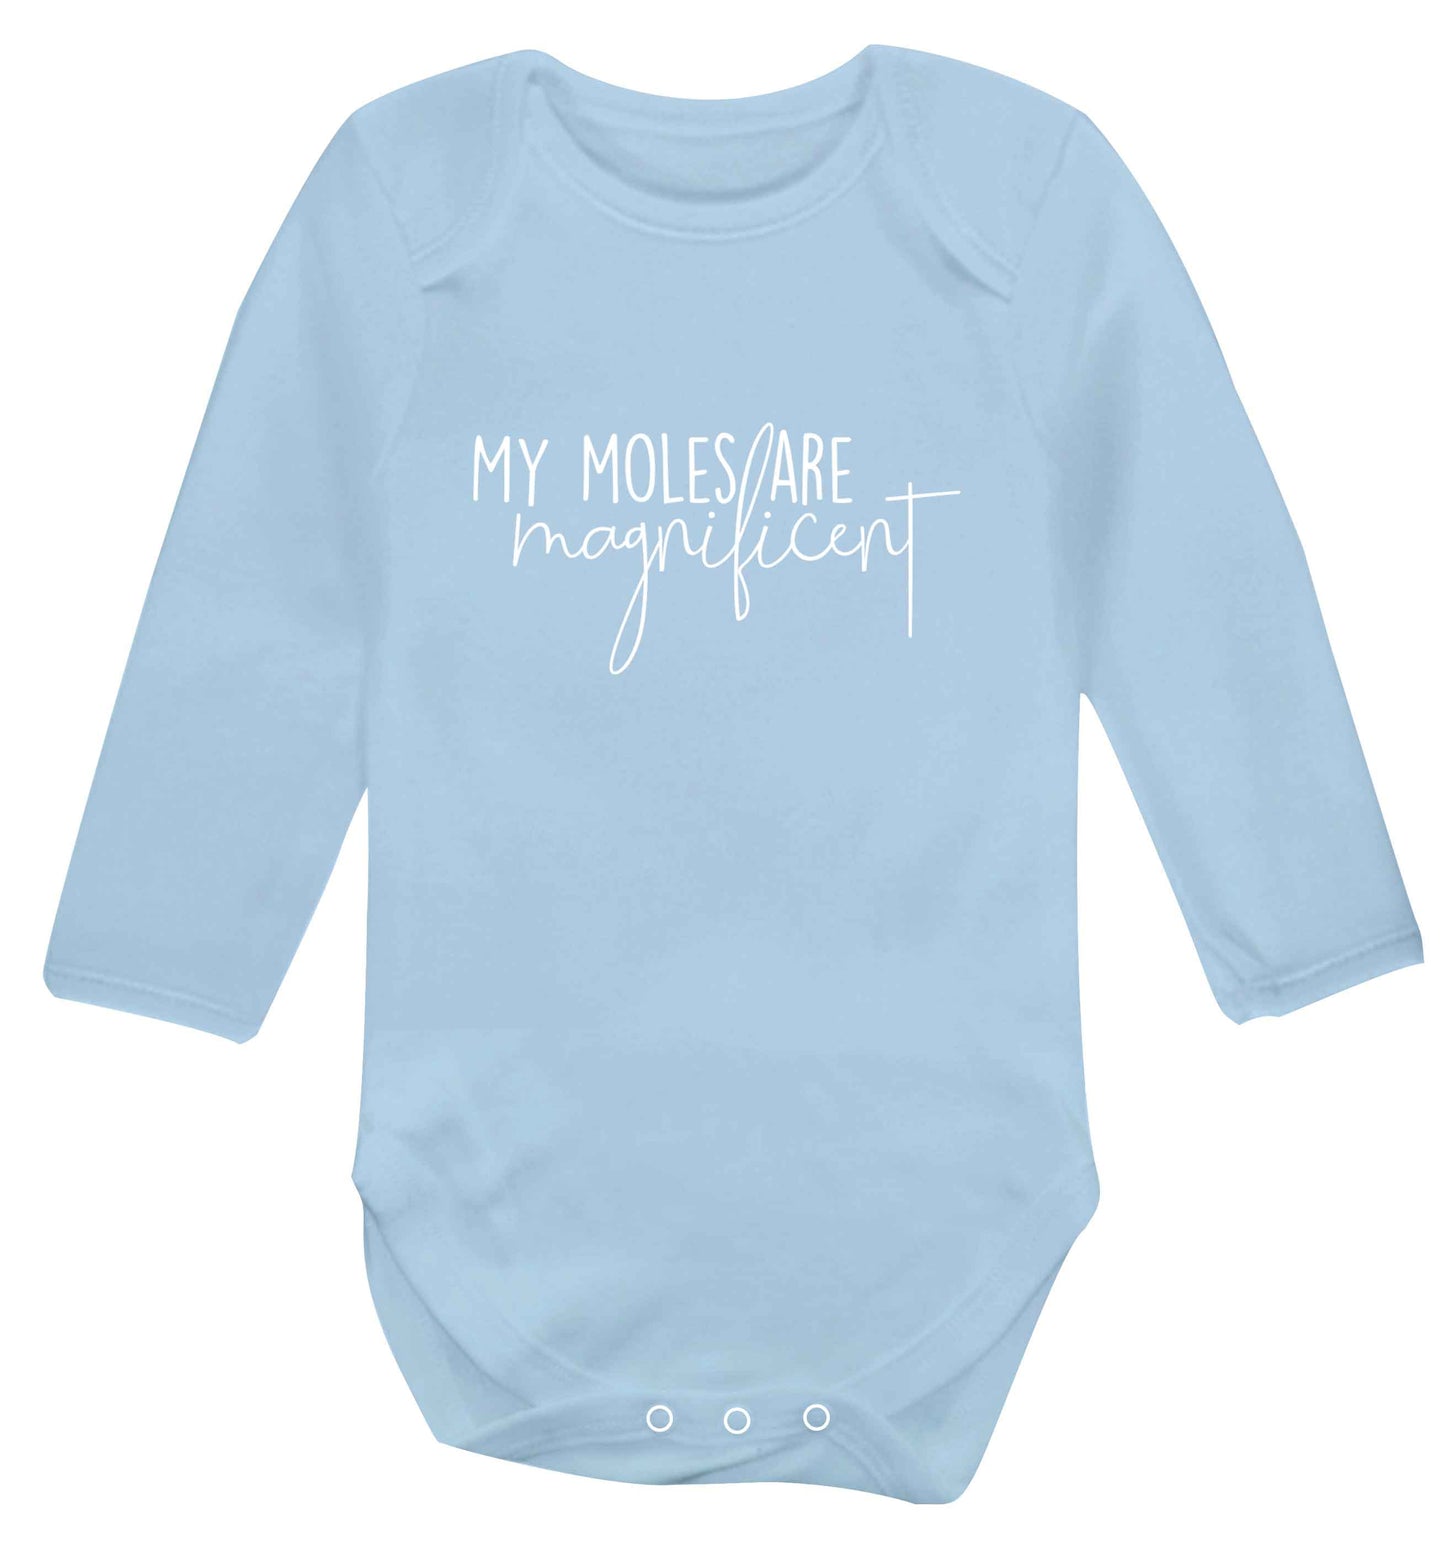 My moles are magnificent baby vest long sleeved pale blue 6-12 months